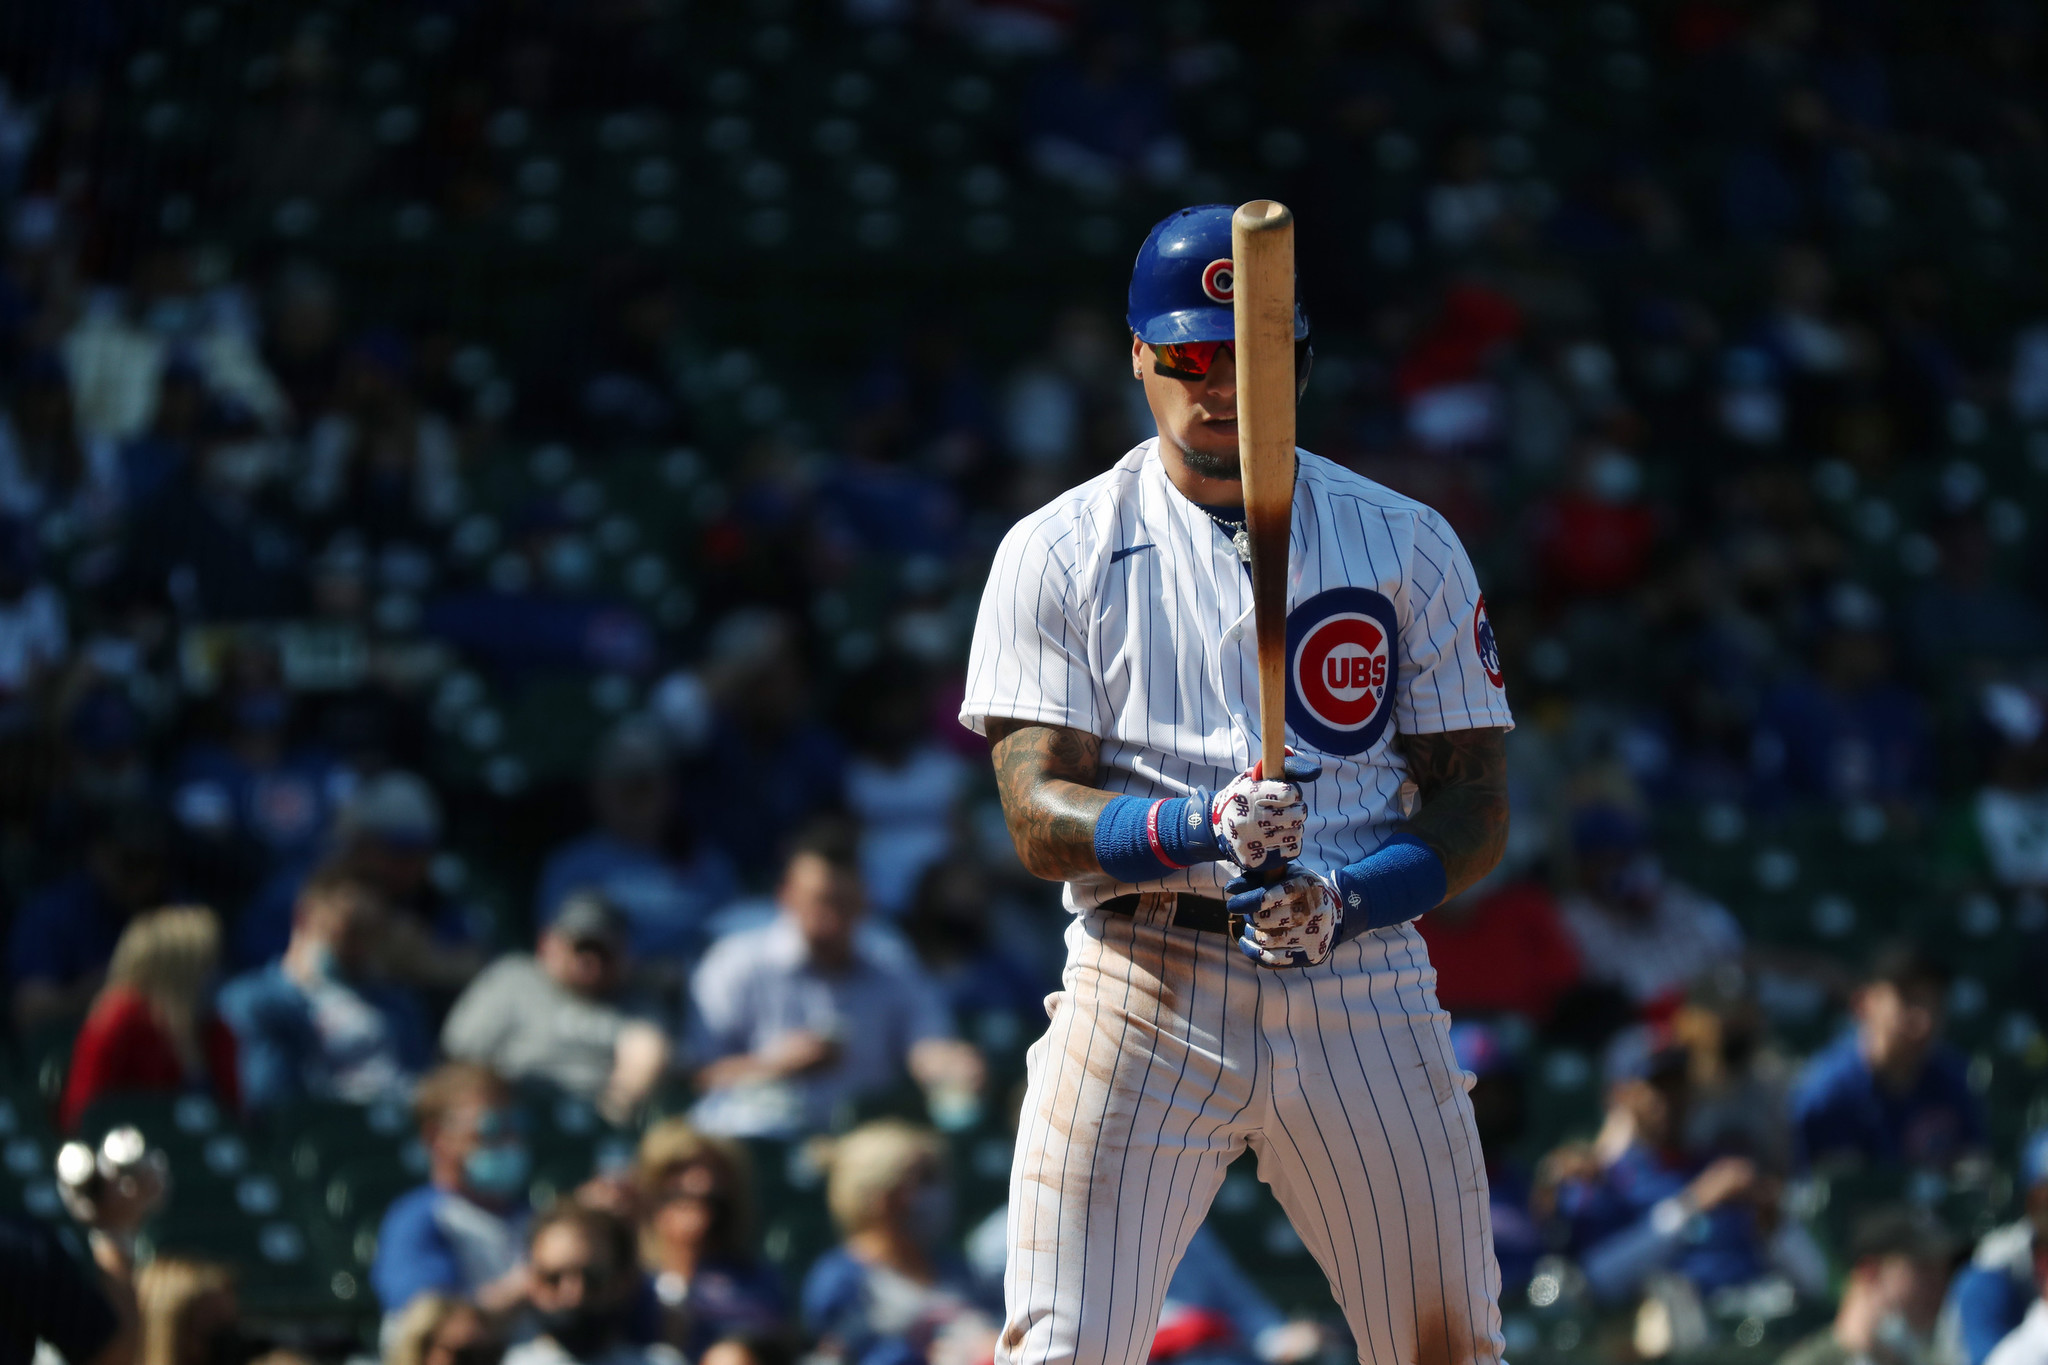 Cubs' Javy Baez is the only Chicago player with a best-selling jersey -  Chicago Sun-Times